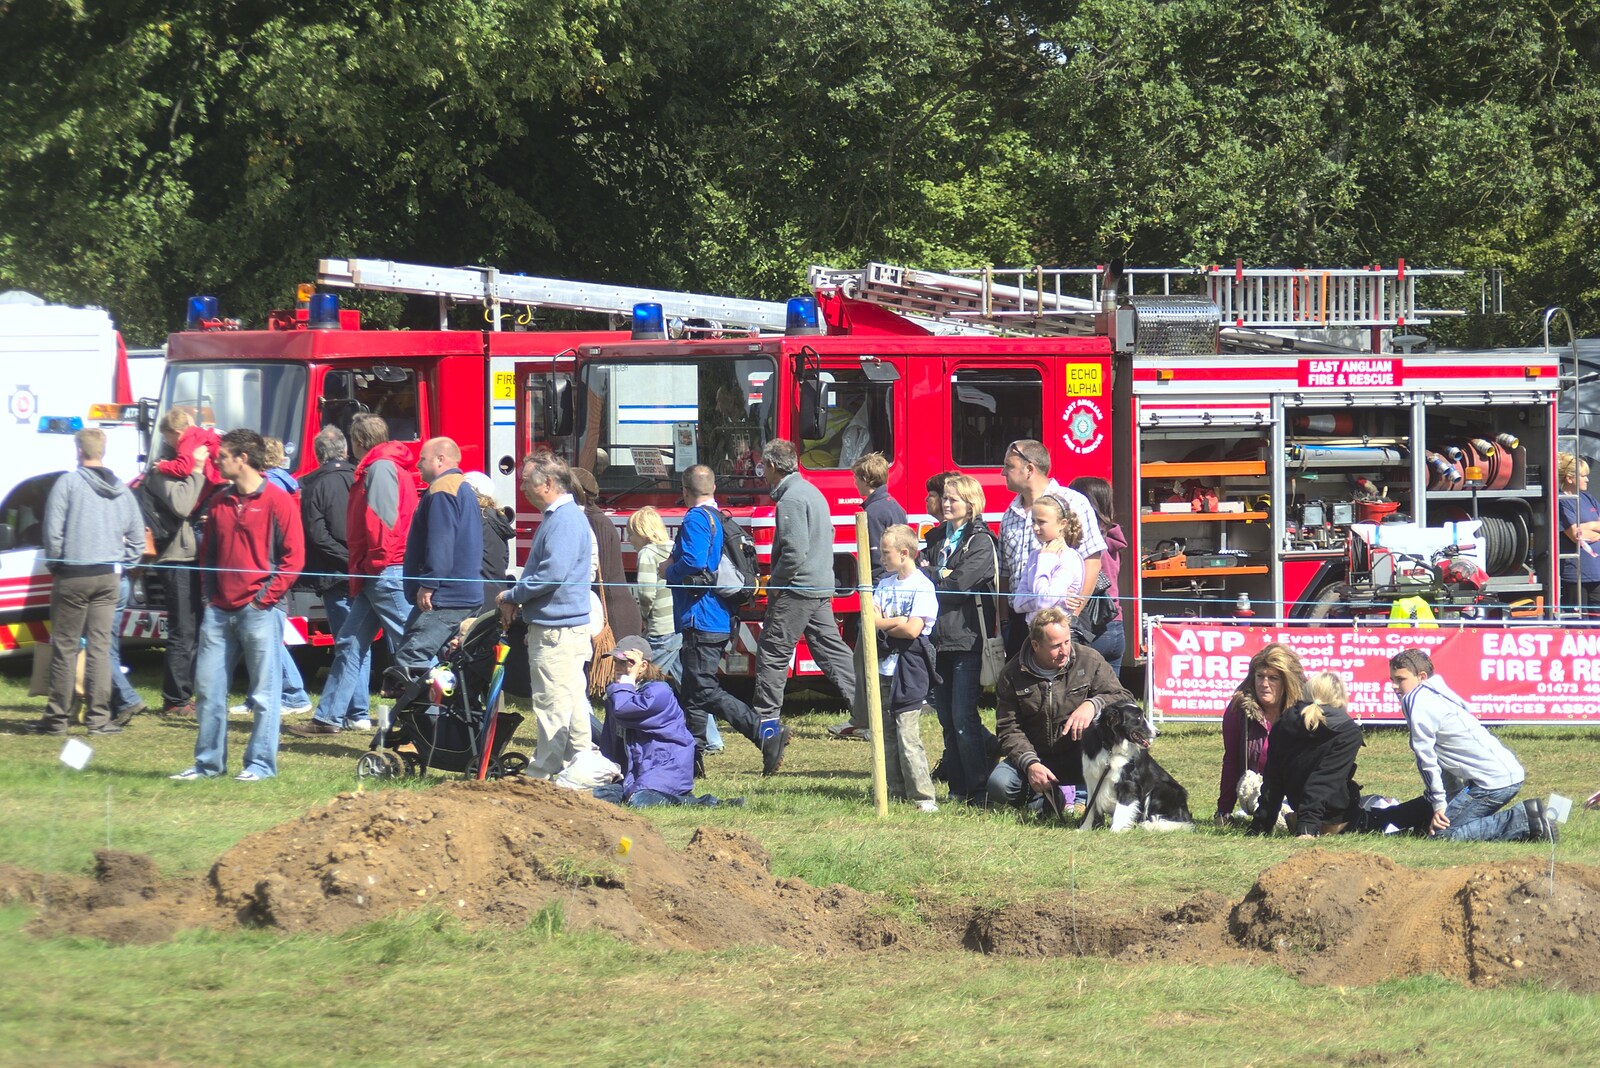 The Eye Show, Palgrave, Suffolk - 30th August 2010: Crowds and fire engines